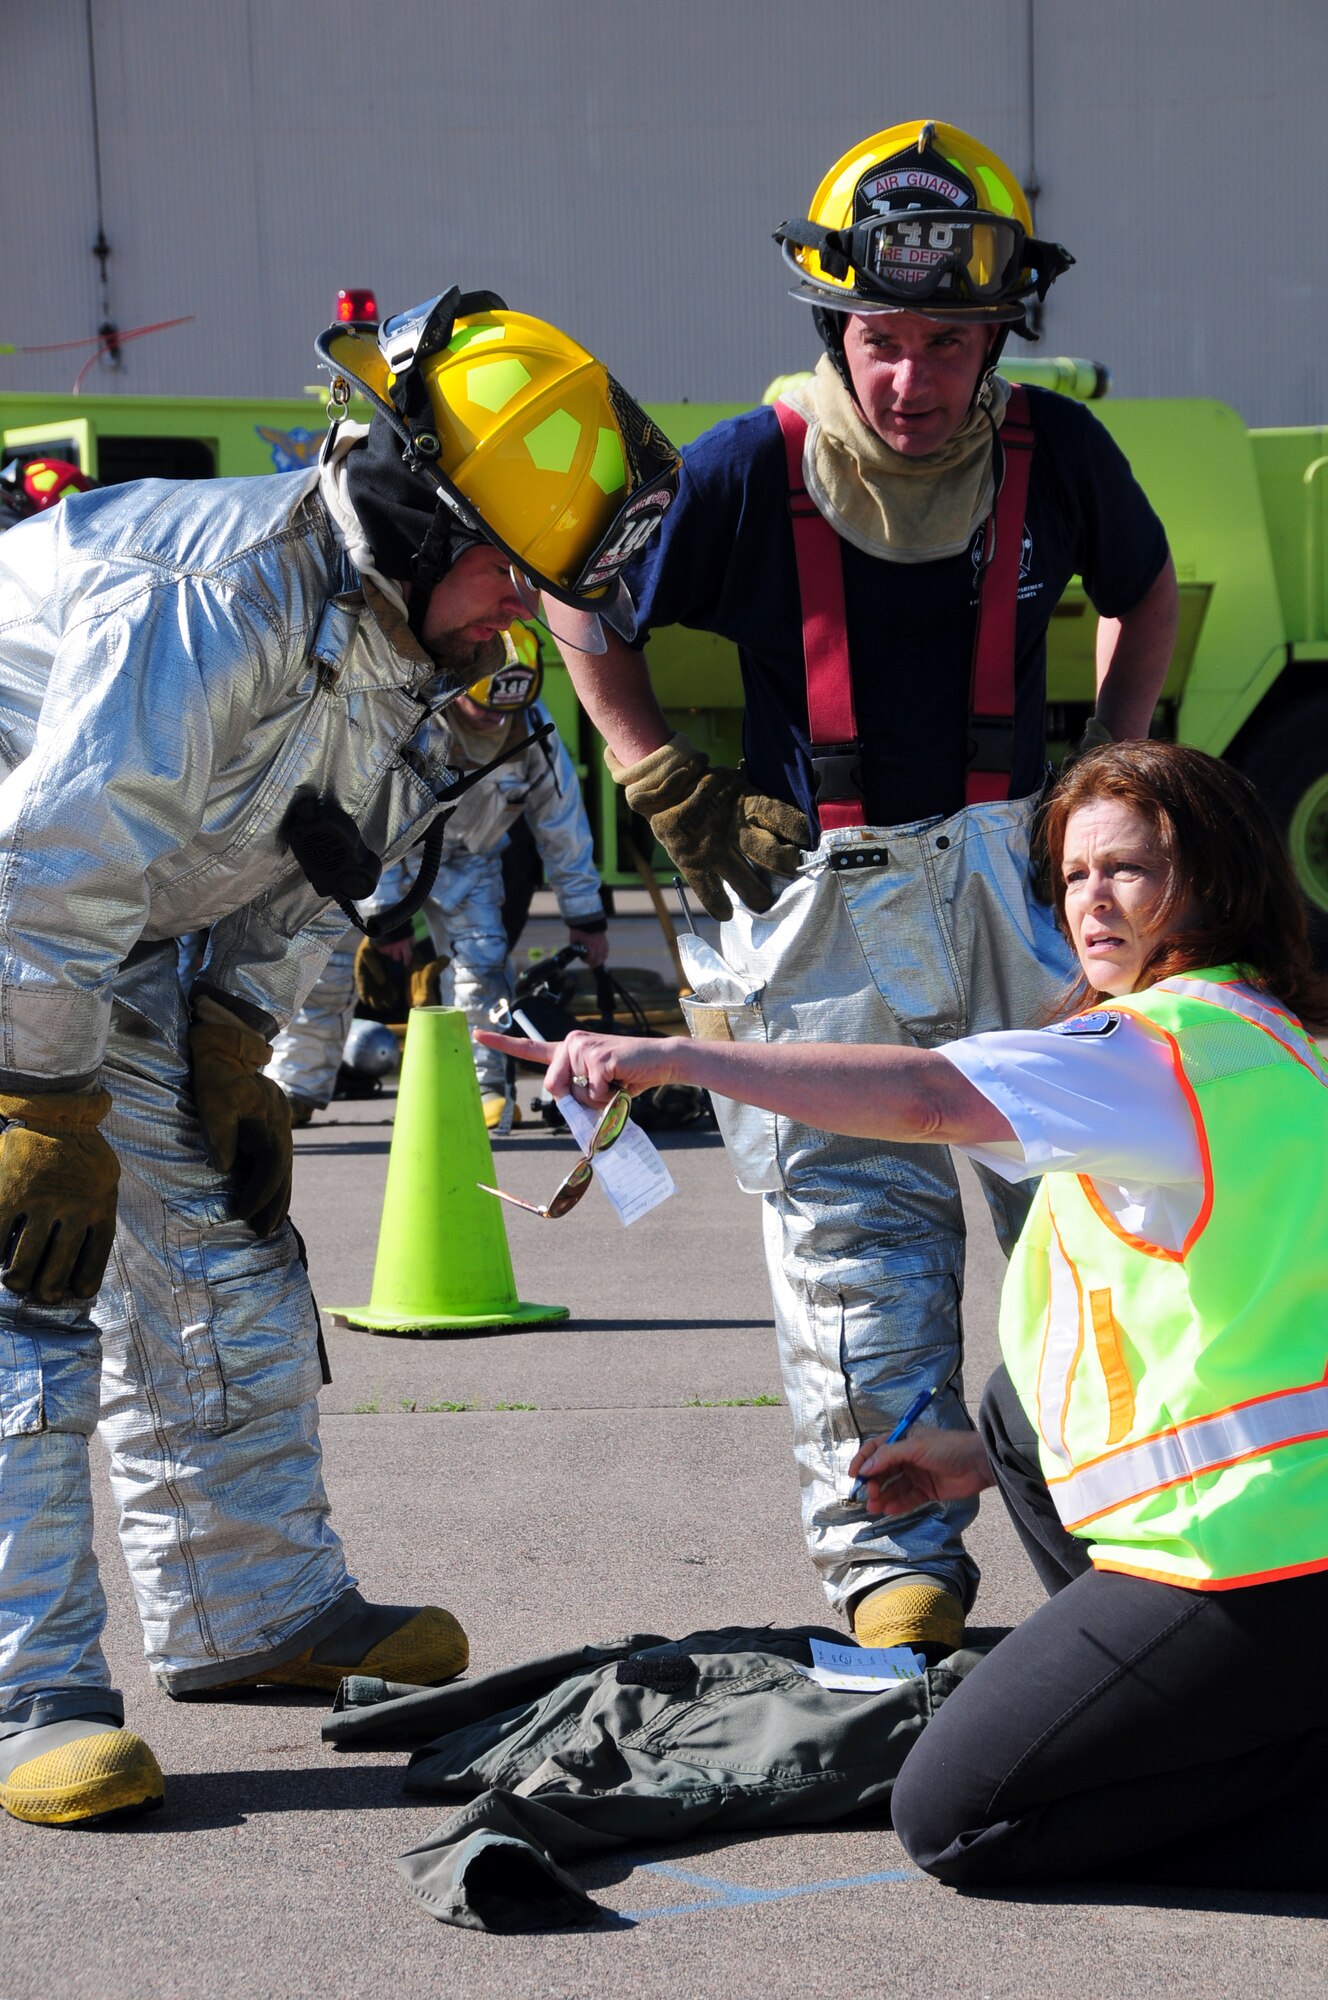 U.S. Air National Guard firefighters Tech. Sgt. Grant Gimple (left) and Senior Master Sgt. Dan Lysher, 148th Fighter Wing, asses simulated victims with an EMS from Lake County, Minn., during a Major Accident Response Exercise (MARE) of a commercial airliner crash at the Duluth International Airport, Minn., June 3, 2010. The MARE was held in conjunction with local, state and federal emergency response agencies to test and validate emergency response capabilities. (U.S. Air Force photo by Master Sgt. Jason W. Rolfe/Released)